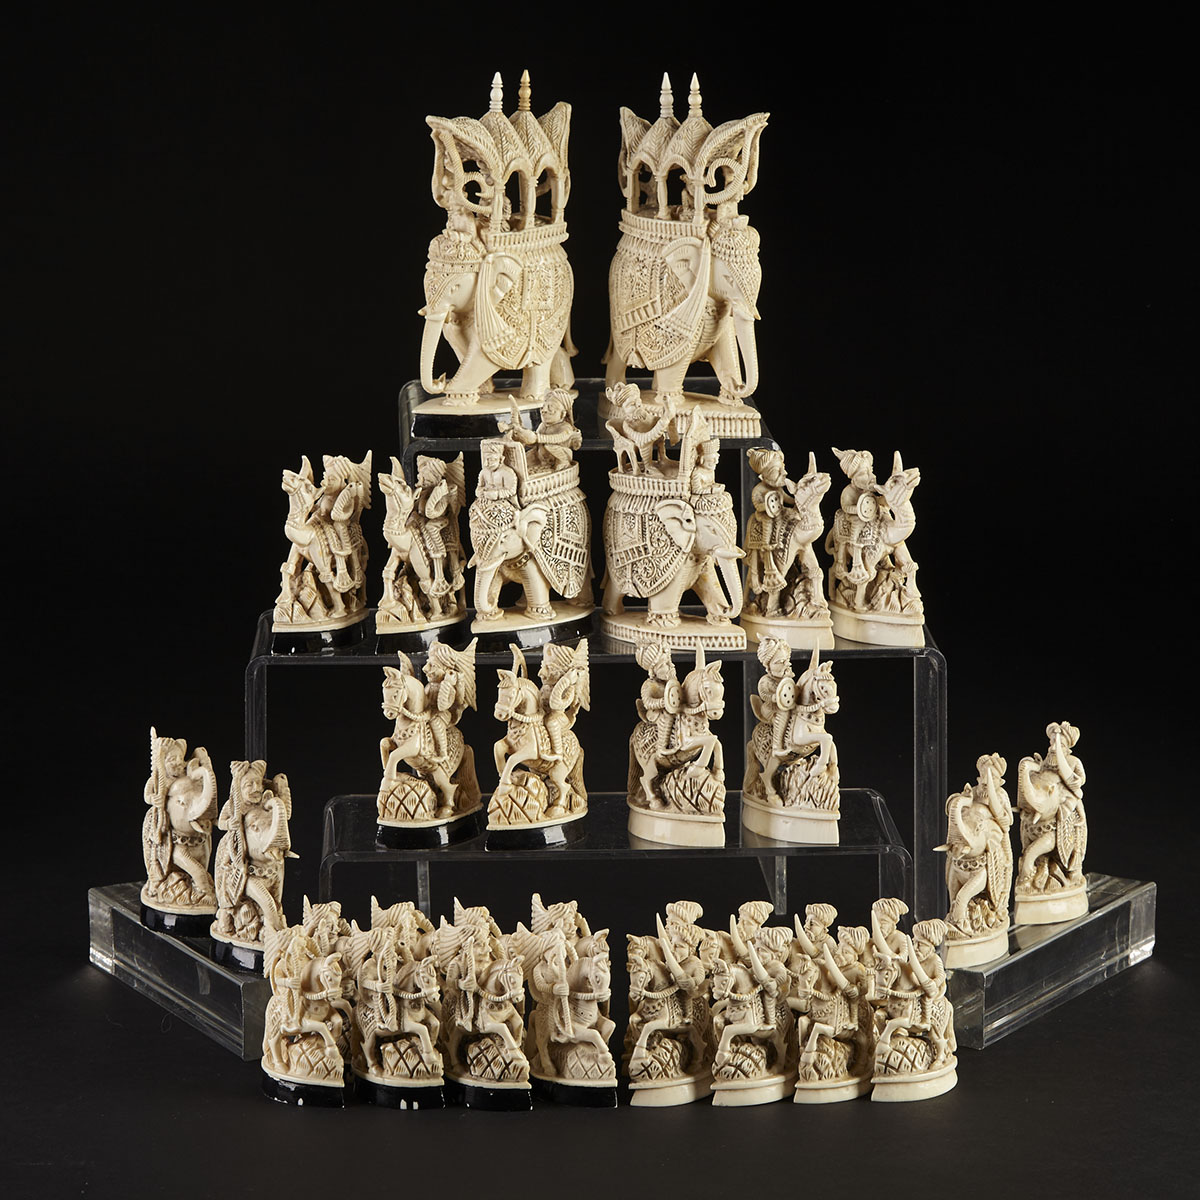 Indian Carved Ivory Figural Chess Set, Rajasthan, 19th century